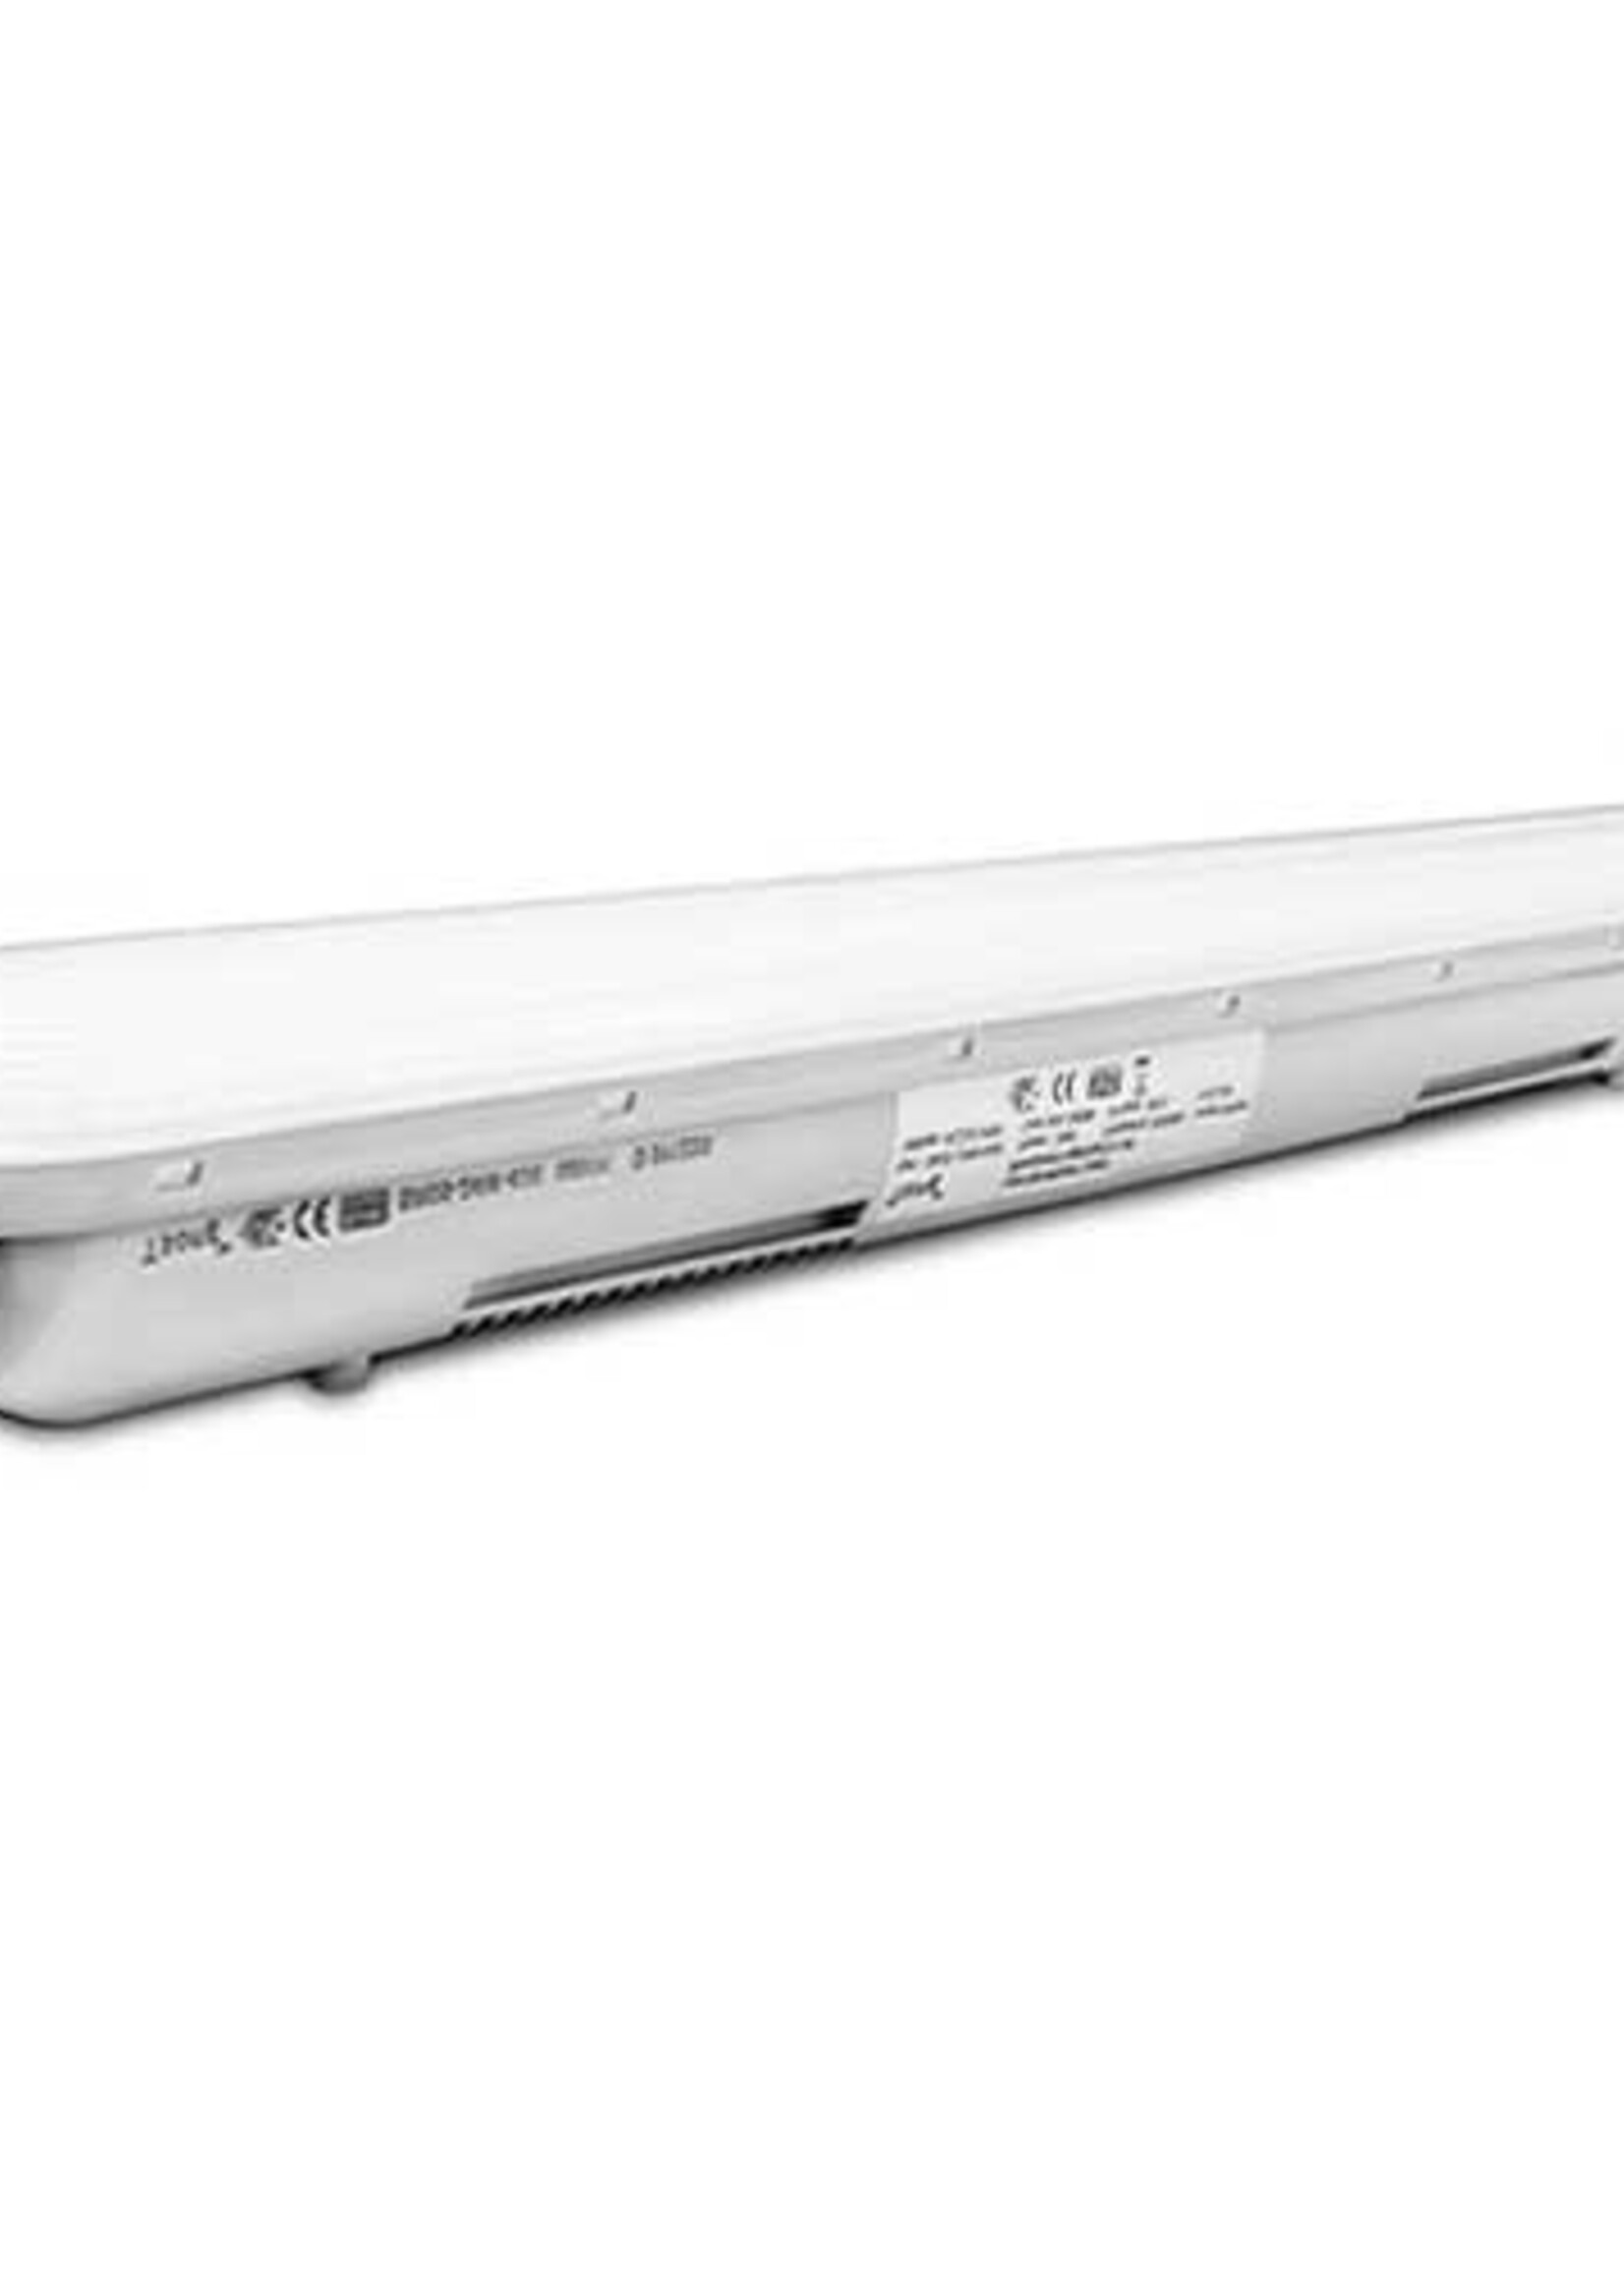 LEDWINKEL-Online LED Tri-Proof Light IP65 Water resistant 120cm connectable bright white 36W